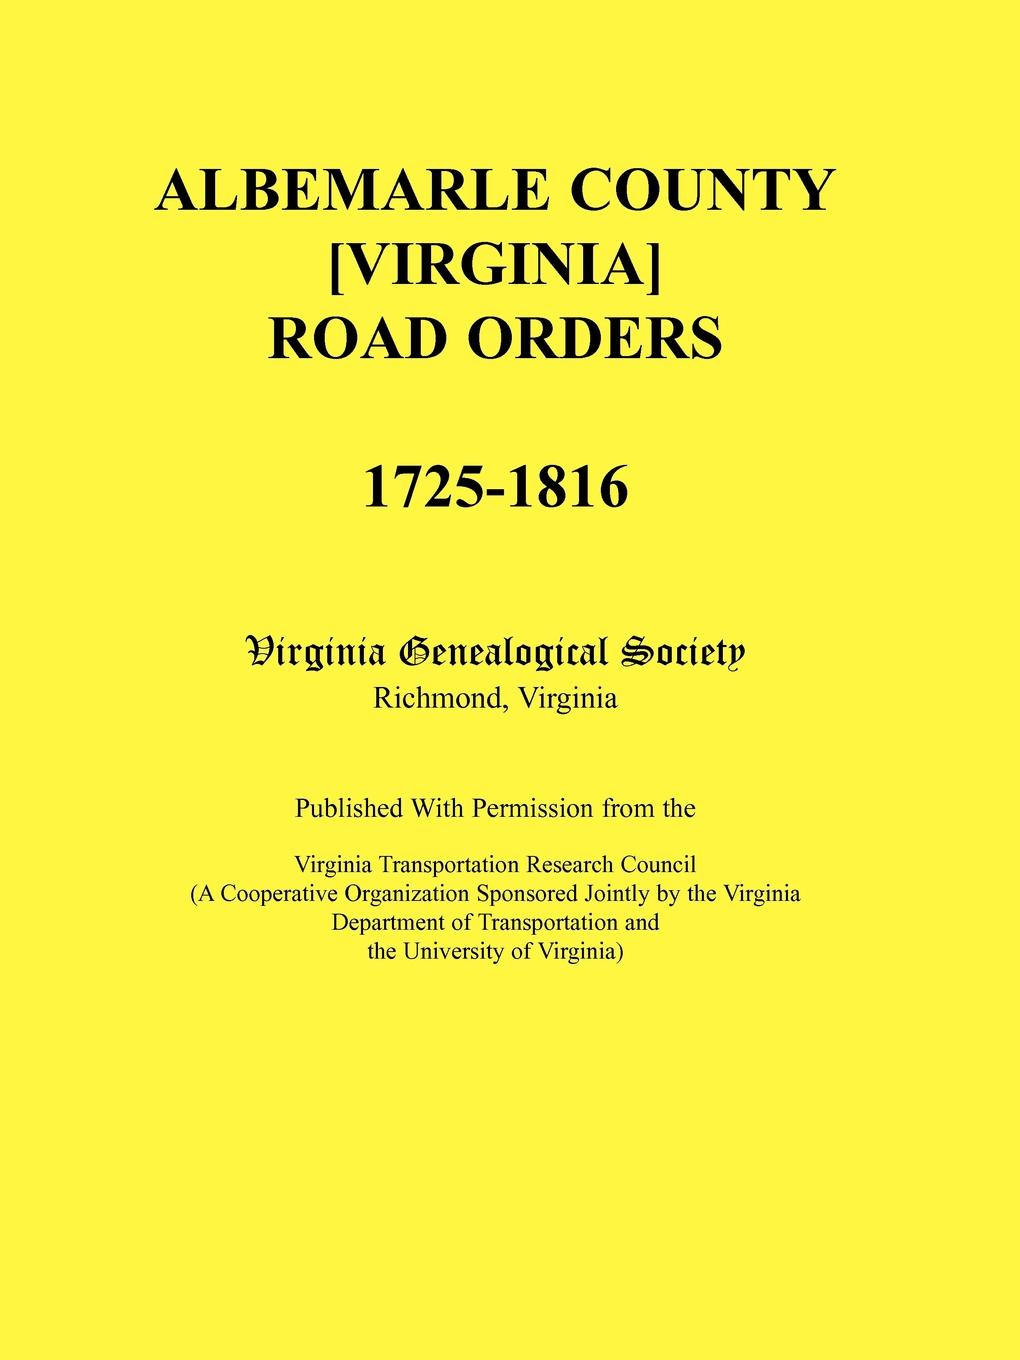 Albemarle County .Virginia. Road Orders, 1725-1816. Published With Permission from the Virginia Transportation Research Council (A Cooperative Organization Sponsored Jointly by the Virginia Department of Transportation and the University of Virginia)